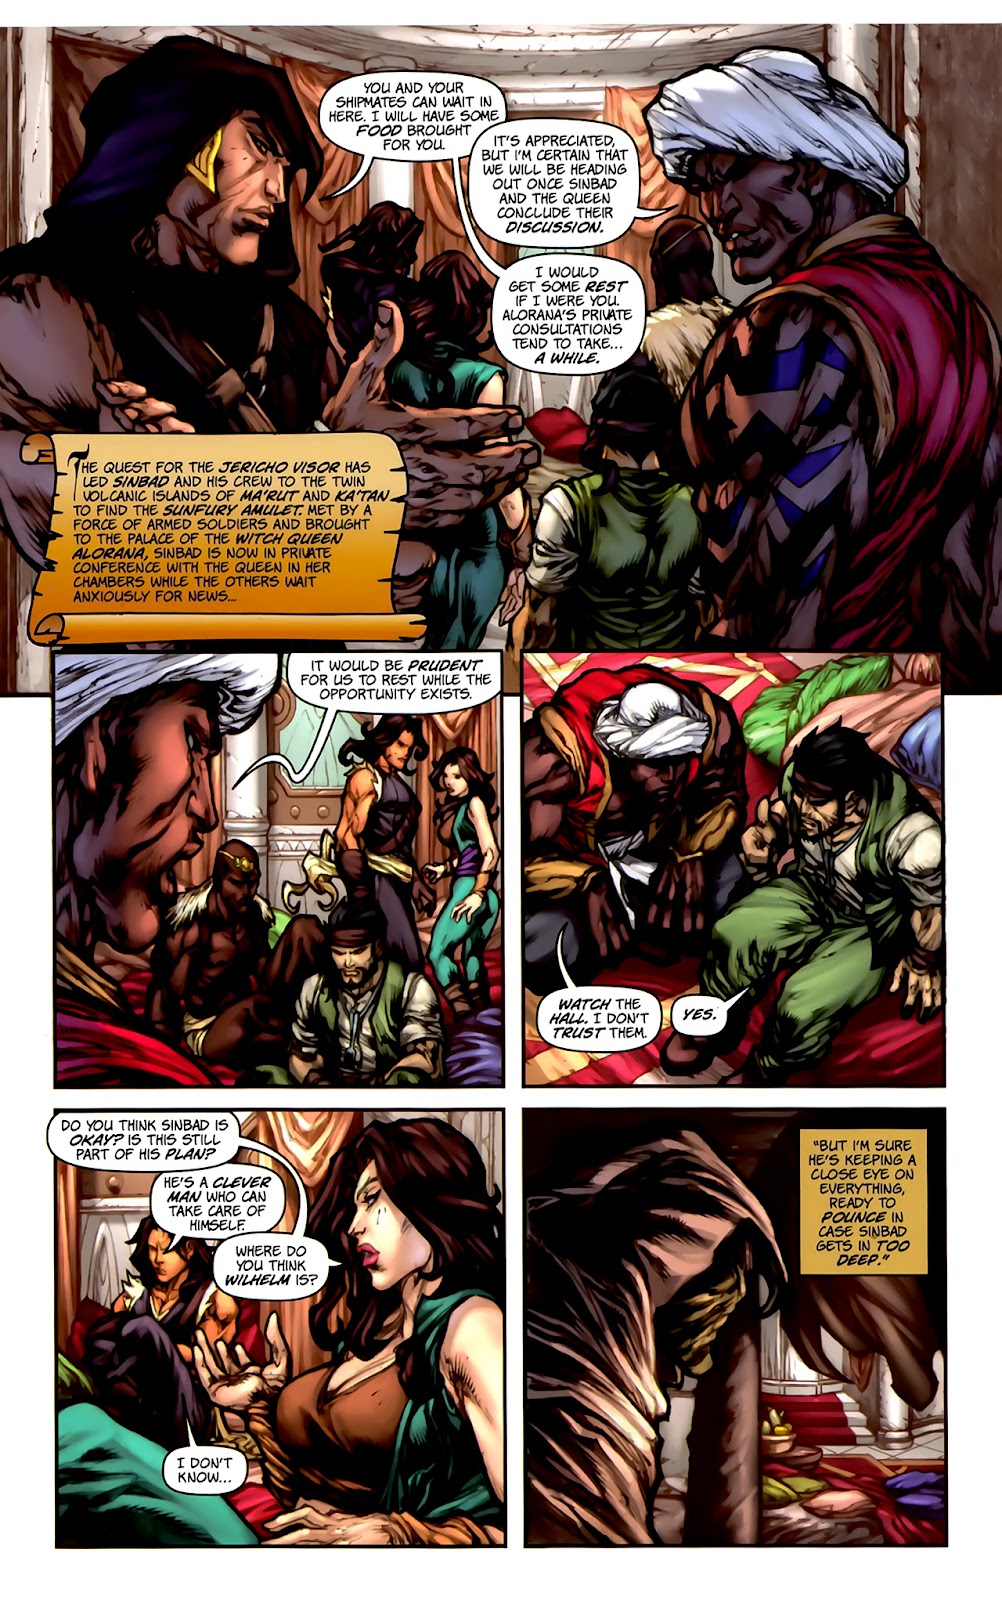 1001 Arabian Nights: The Adventures of Sinbad issue 2 - Page 7